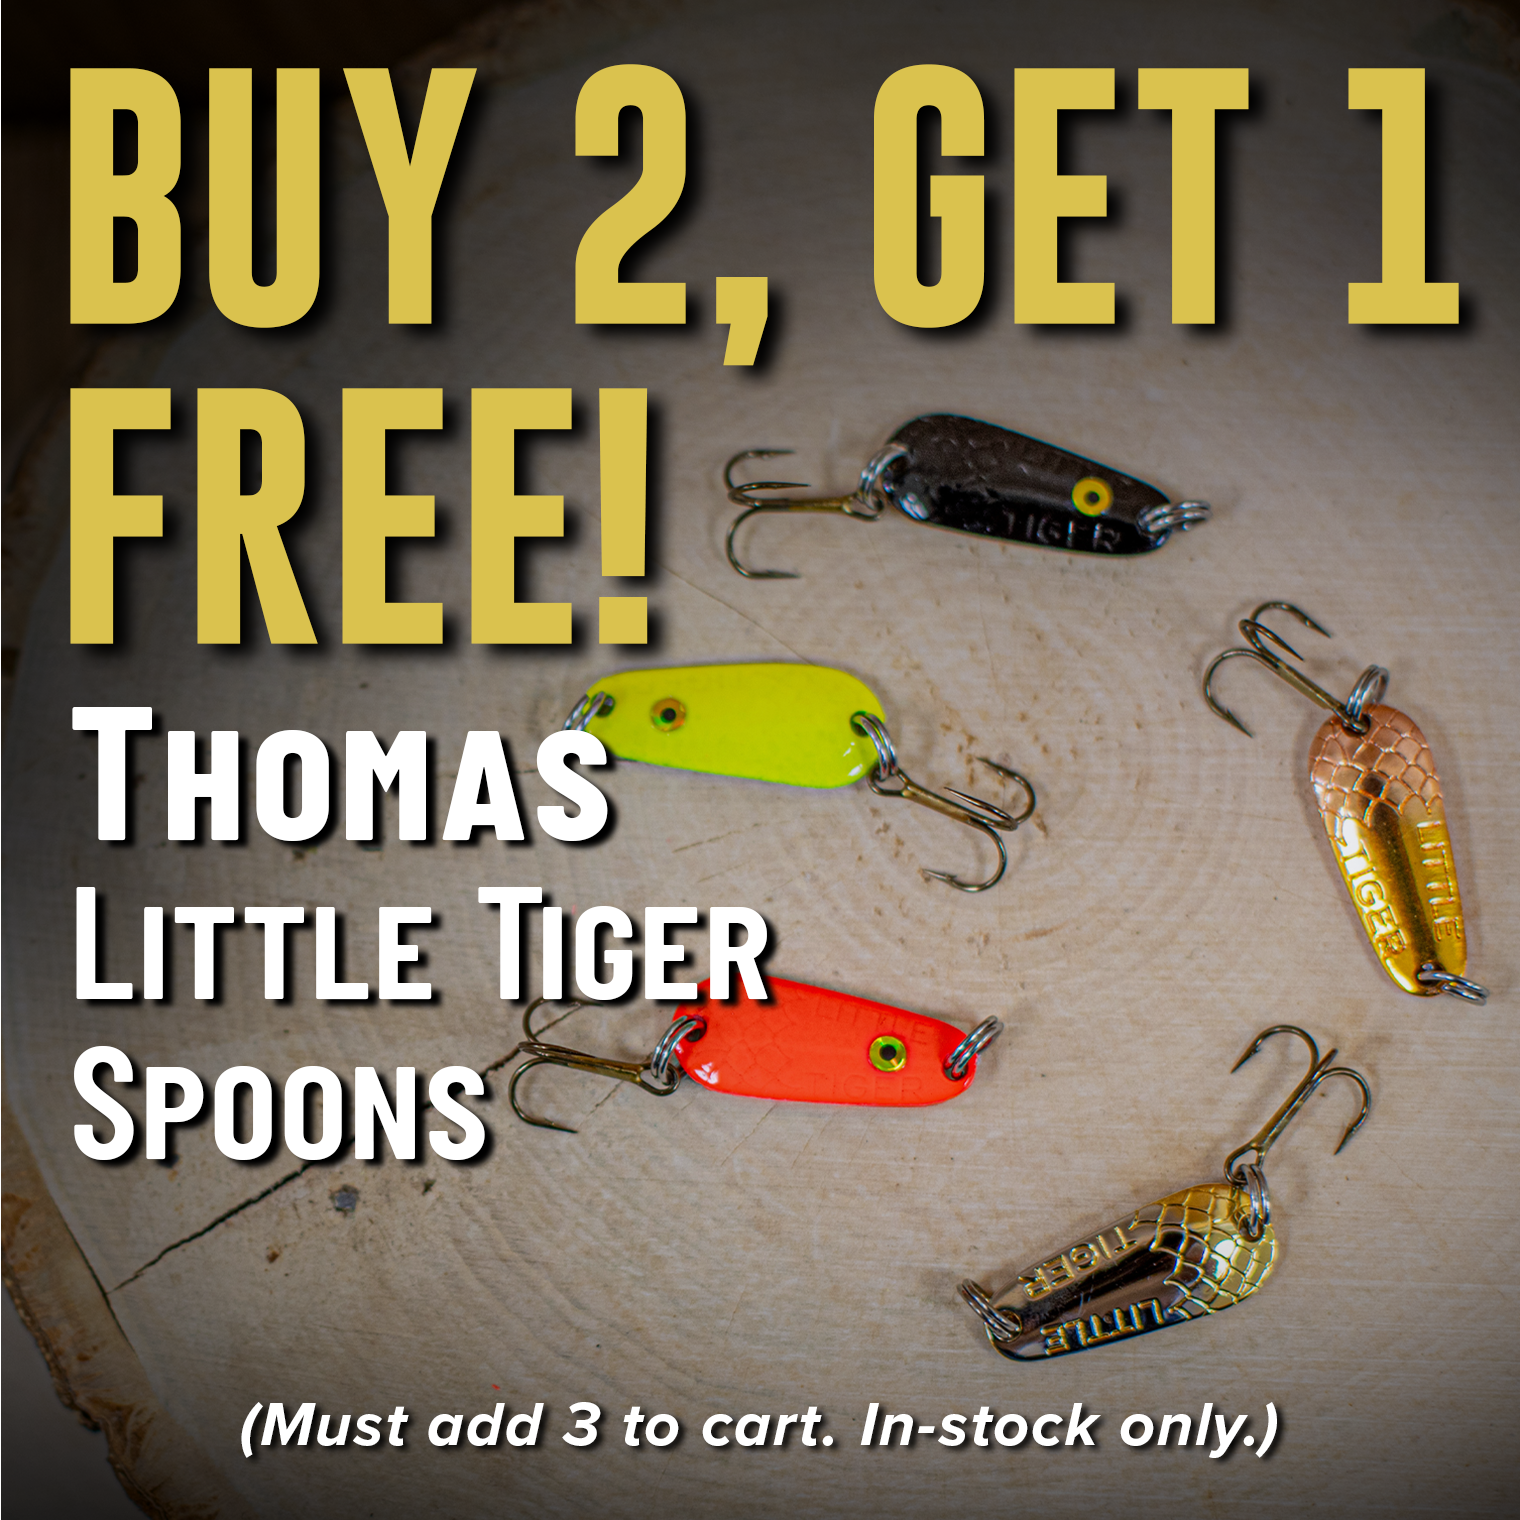 Buy 2, Get 1 Free! Thomas Little Tiger Spoons